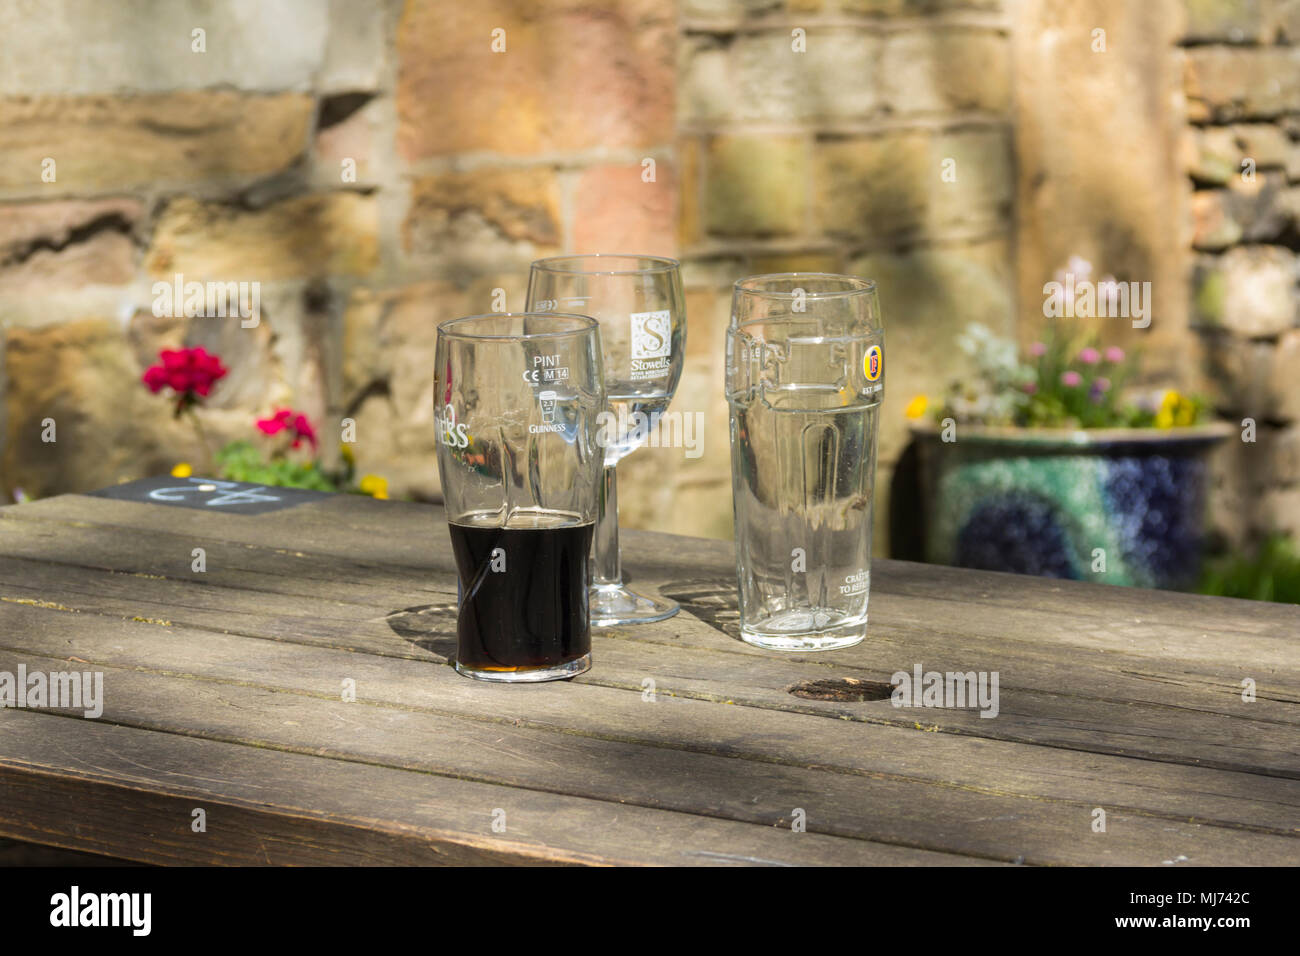 Three empty or half empty beer and wine glasses on a outside wooden pub table in a beer garden. The glasses are branded Guinness, Stowells and Fosters Stock Photo